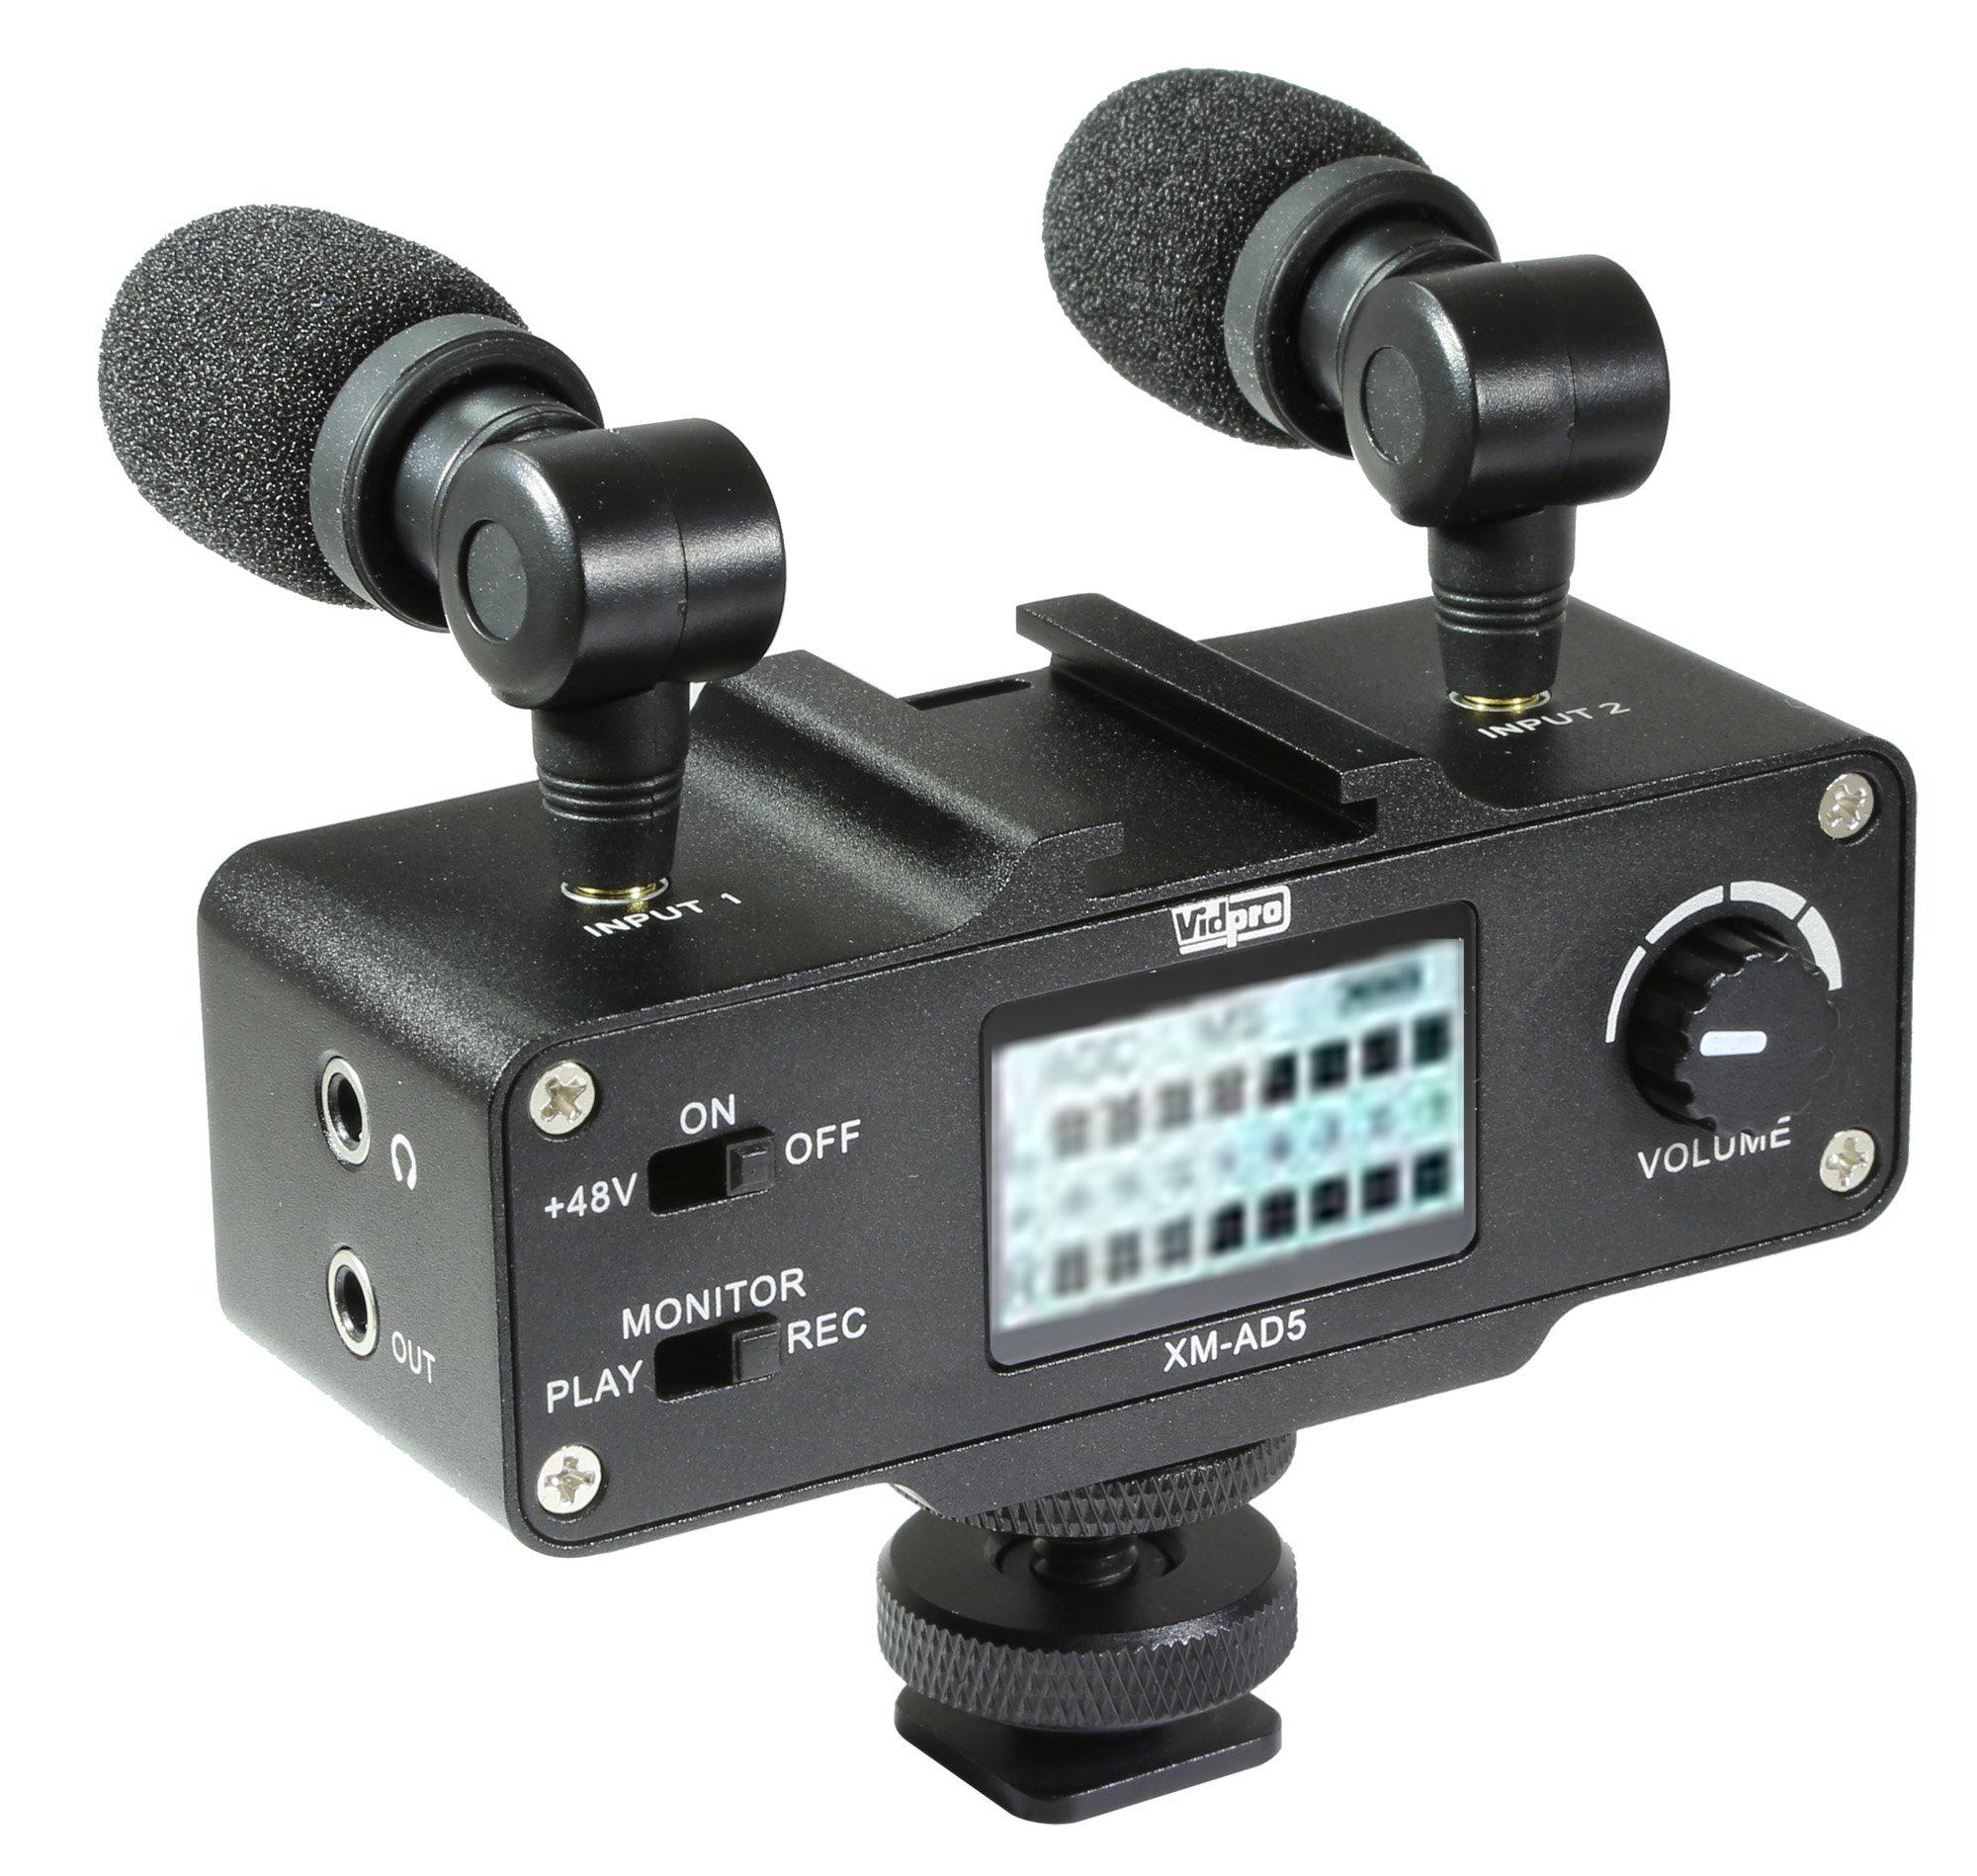 vidpro external microphone, compatible with hitachi dz-hs300a camcorder xm-ad5 mini pre-amp smart mixer with dual condenser m